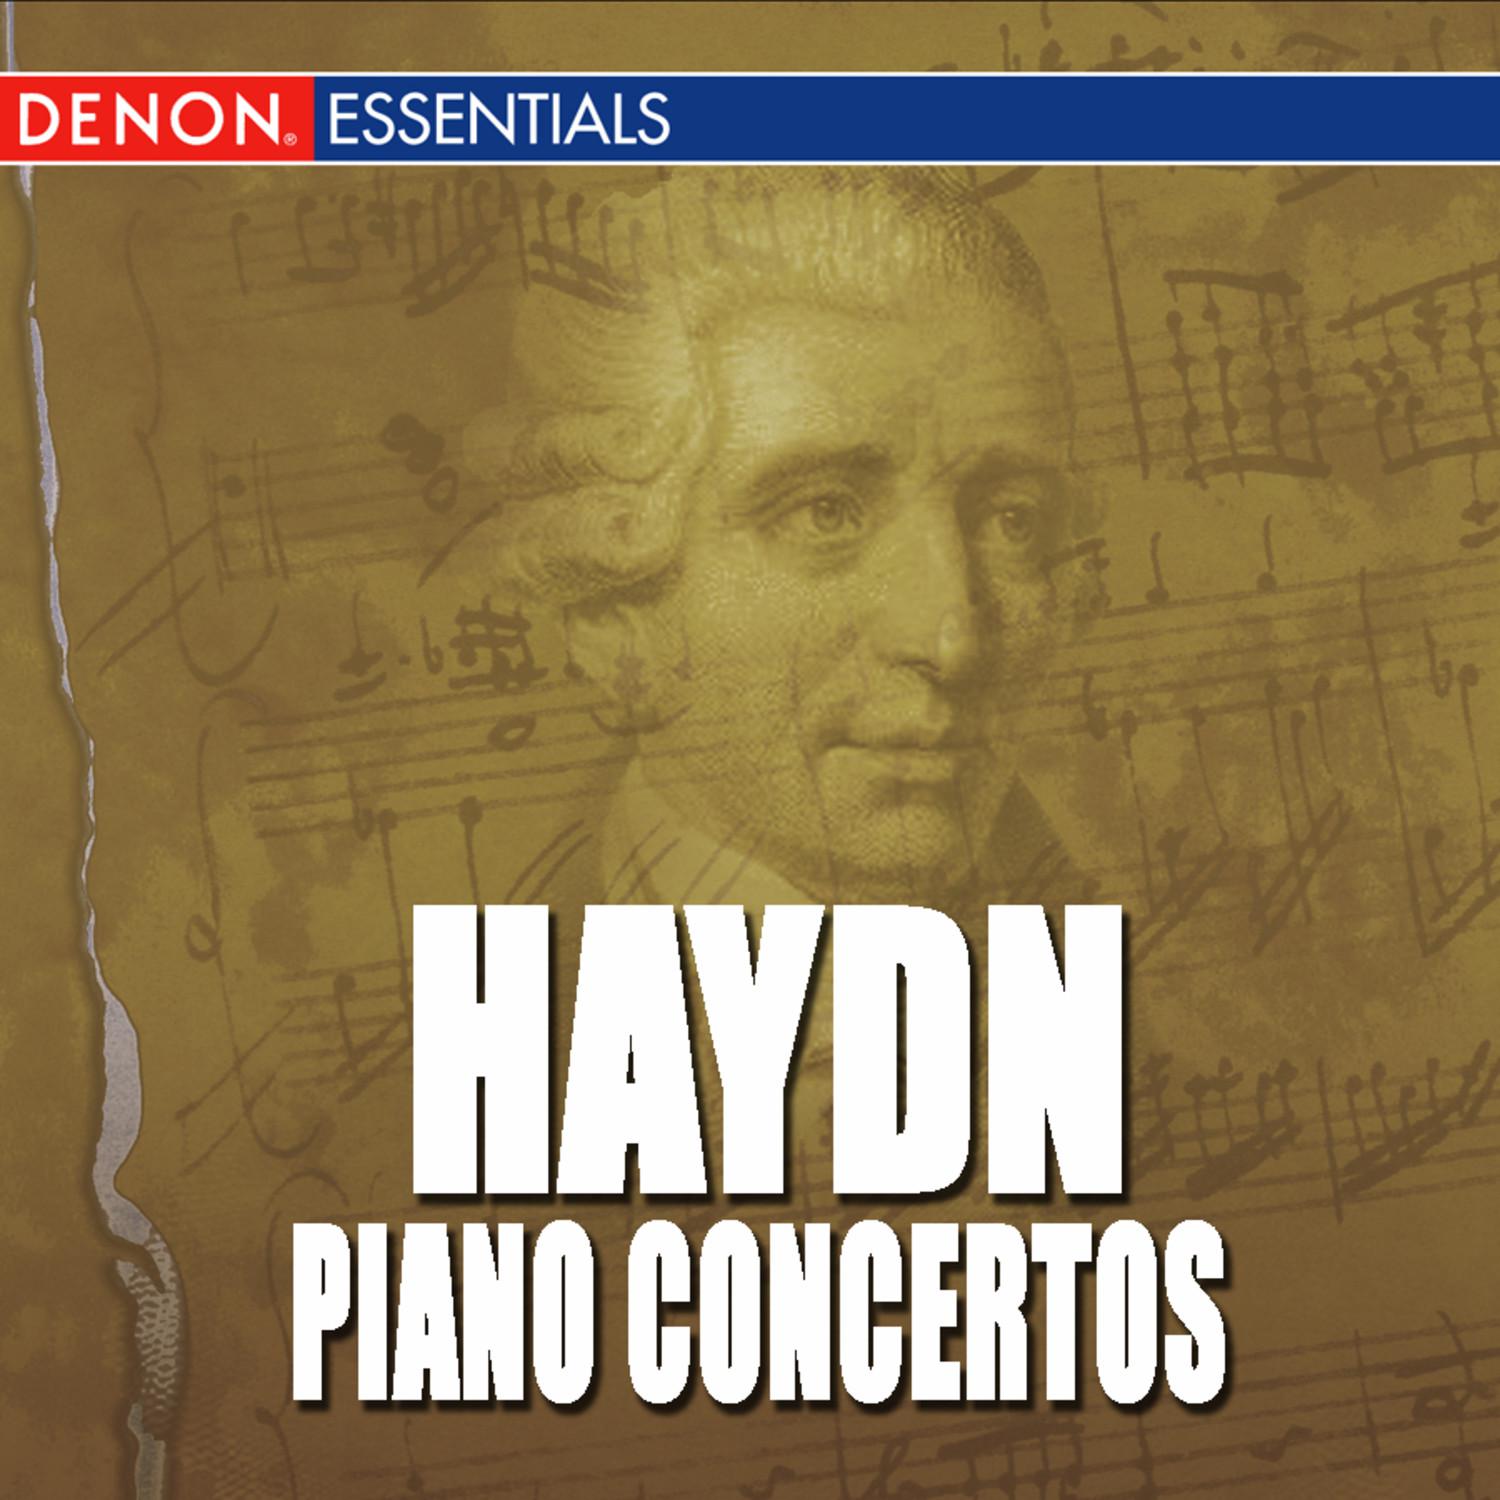 Concerto for Piano and Strings No. 11 in D Major, Op. 21, H 18: I. Vivace